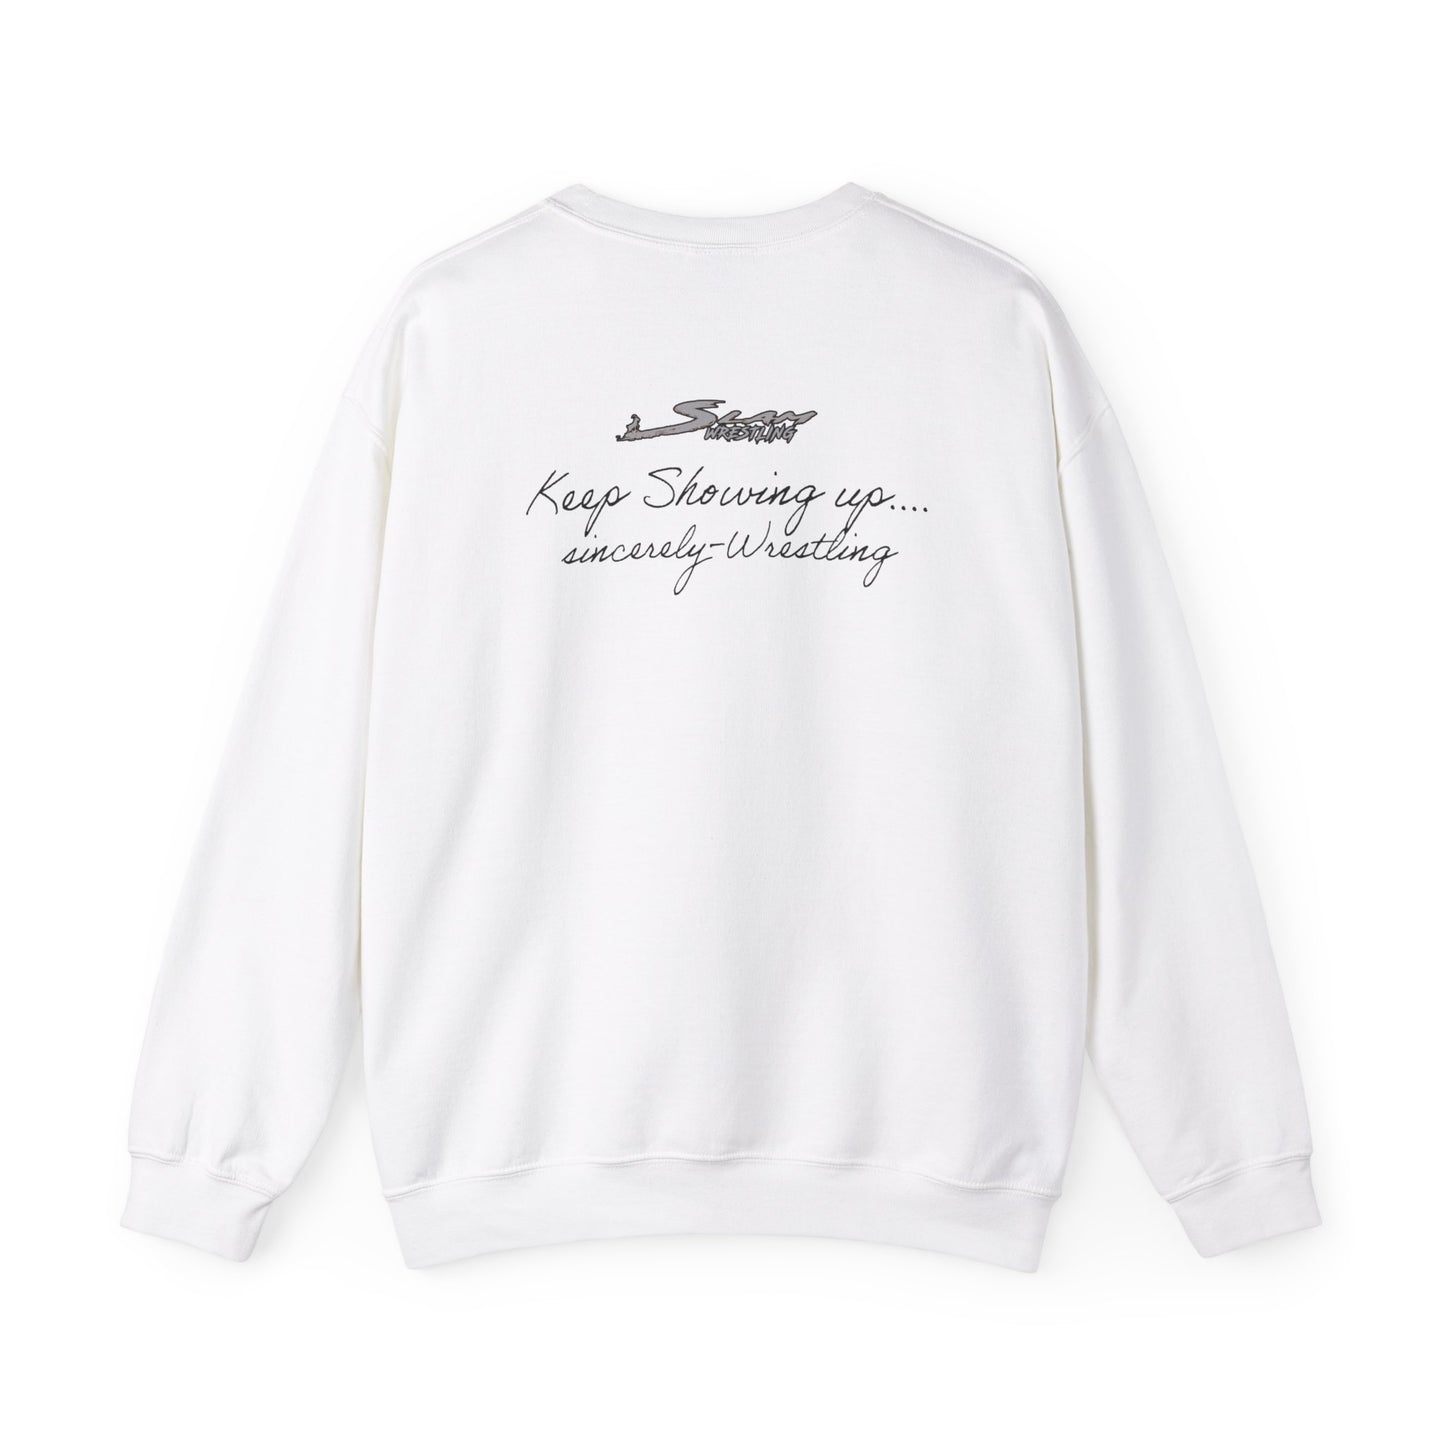 Keep Showing Up - Sincerely, Wrestling" Girls' Crew Neck Sweater